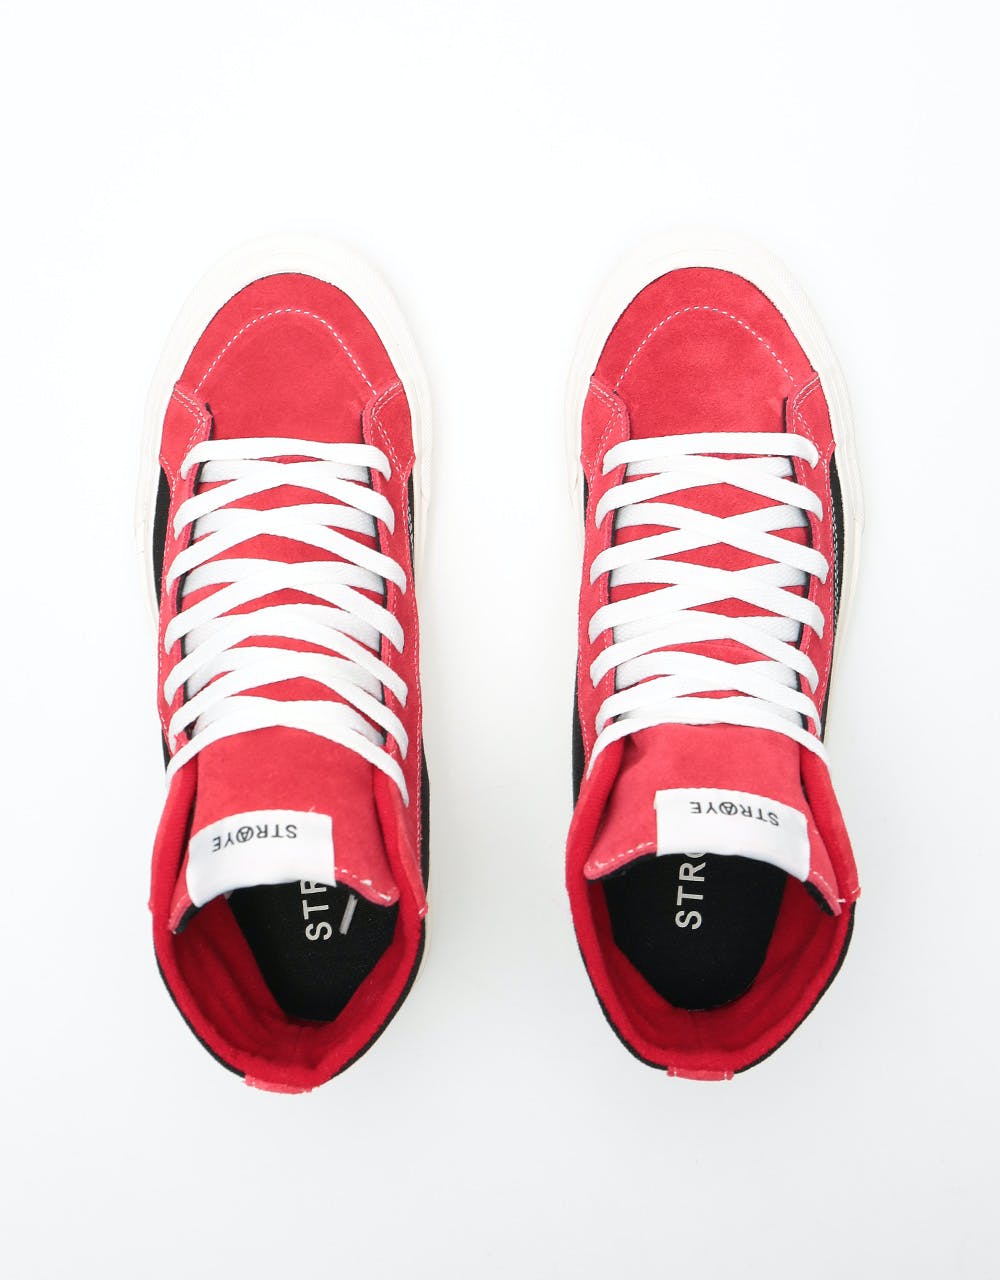 Straye Hiland Skate Shoes - FO Red